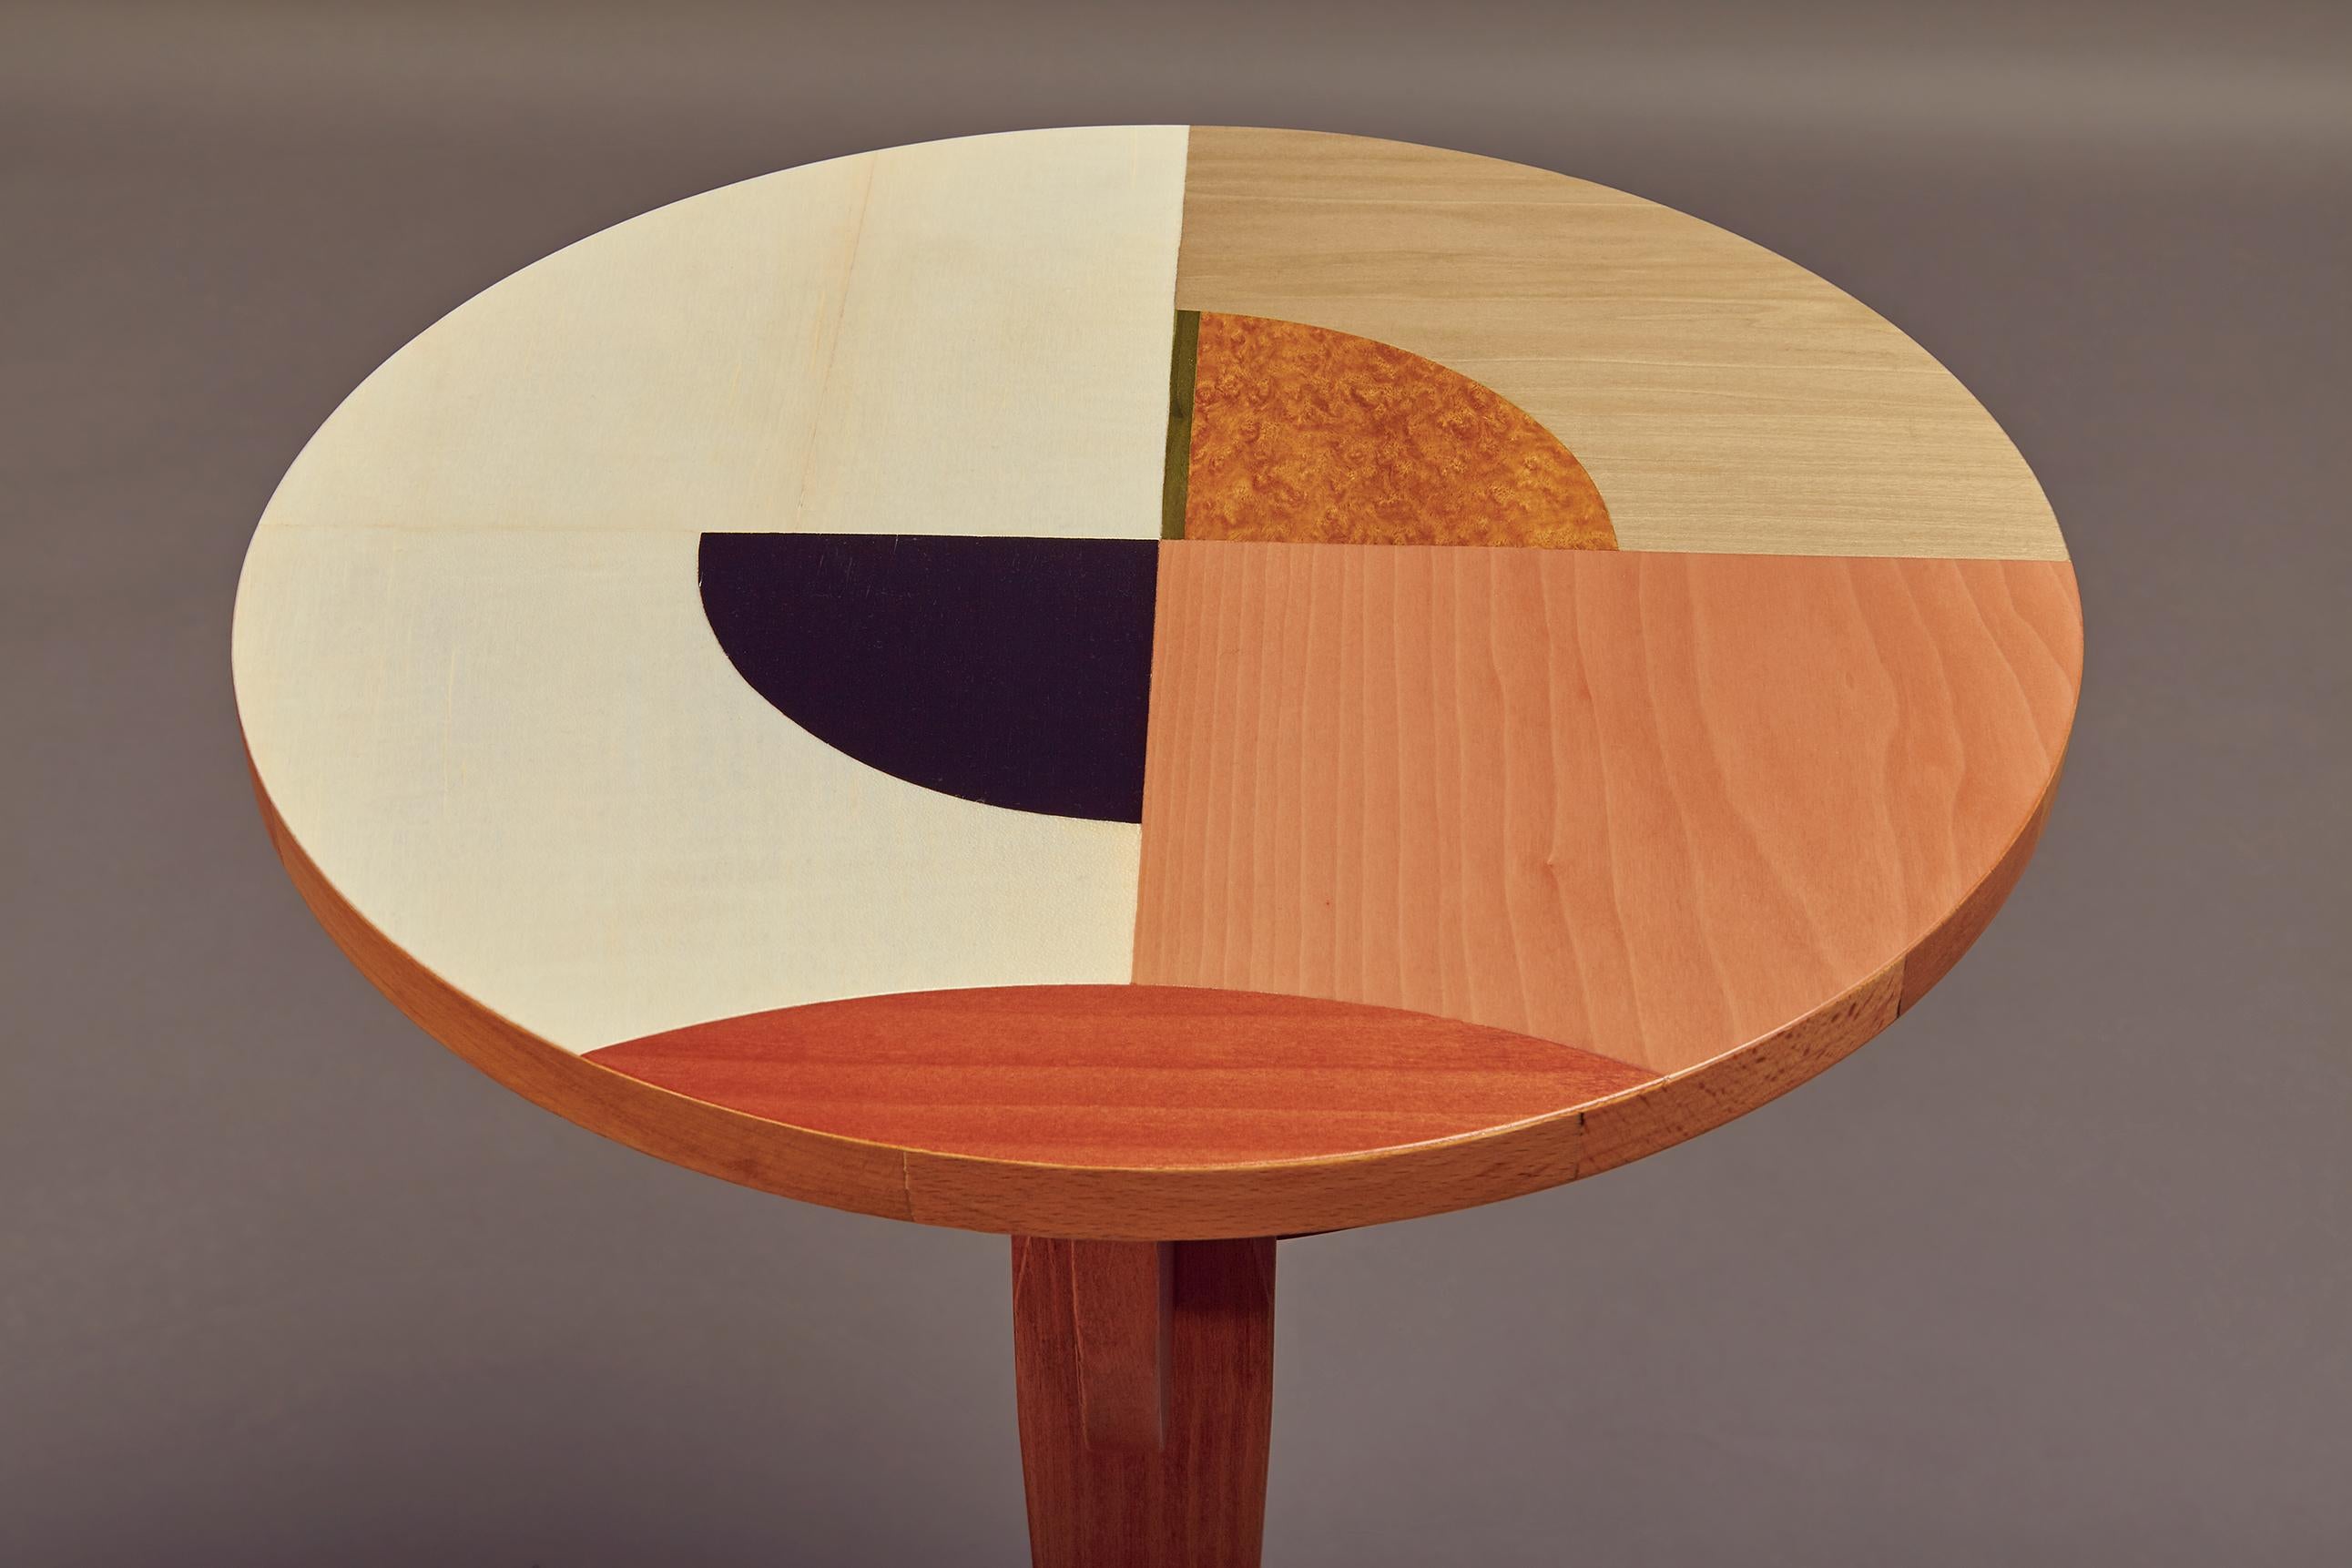 Side table in dyed pink ash with colored top inlay from different woods embellished with an aluminum ring.

Suprematism (Russian: ?????????´??) is an art movement focused on basic geometric forms, such as circles, squares, lines, and rectangles,